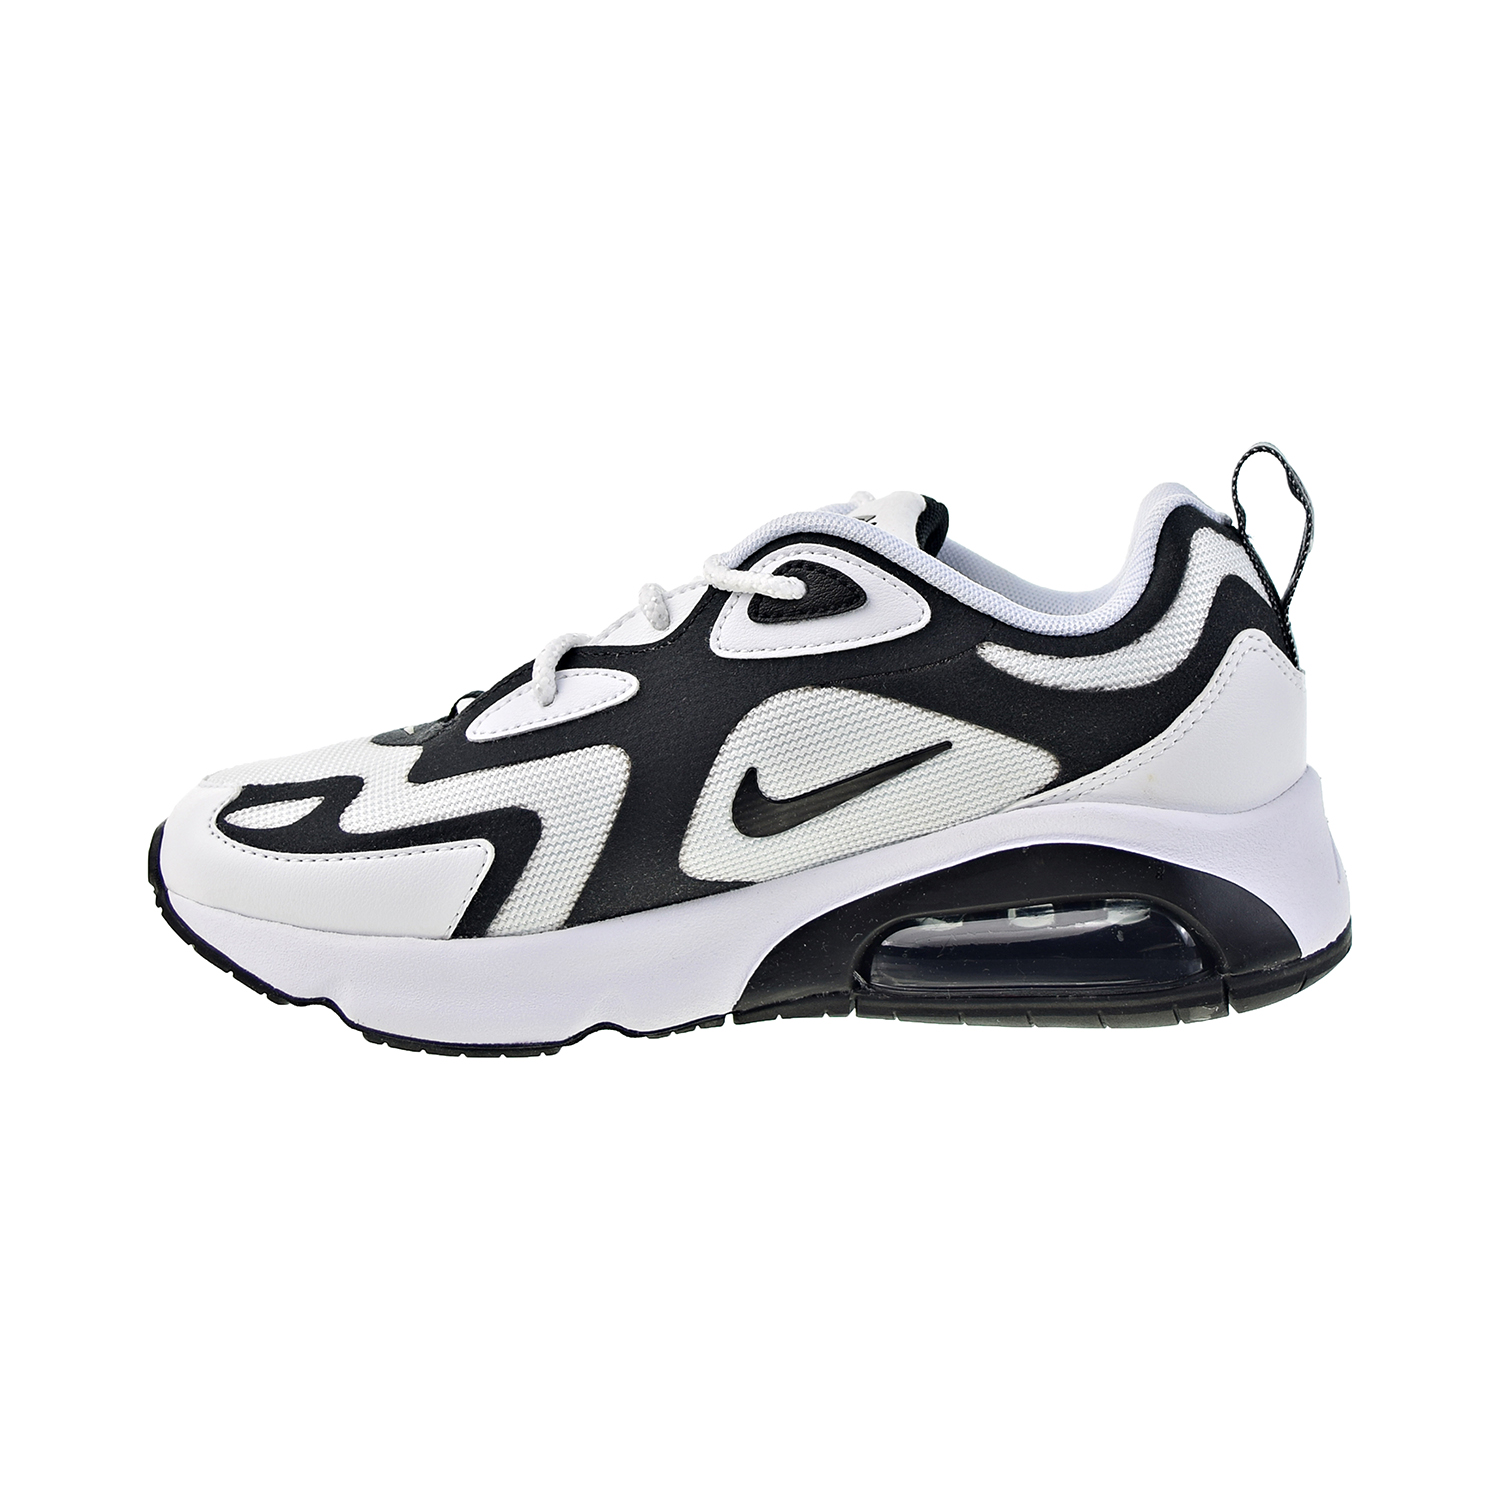 Nike Air Max 200 Womens Shoes Size 6, Color: White/Black/Anthracite - image 4 of 6